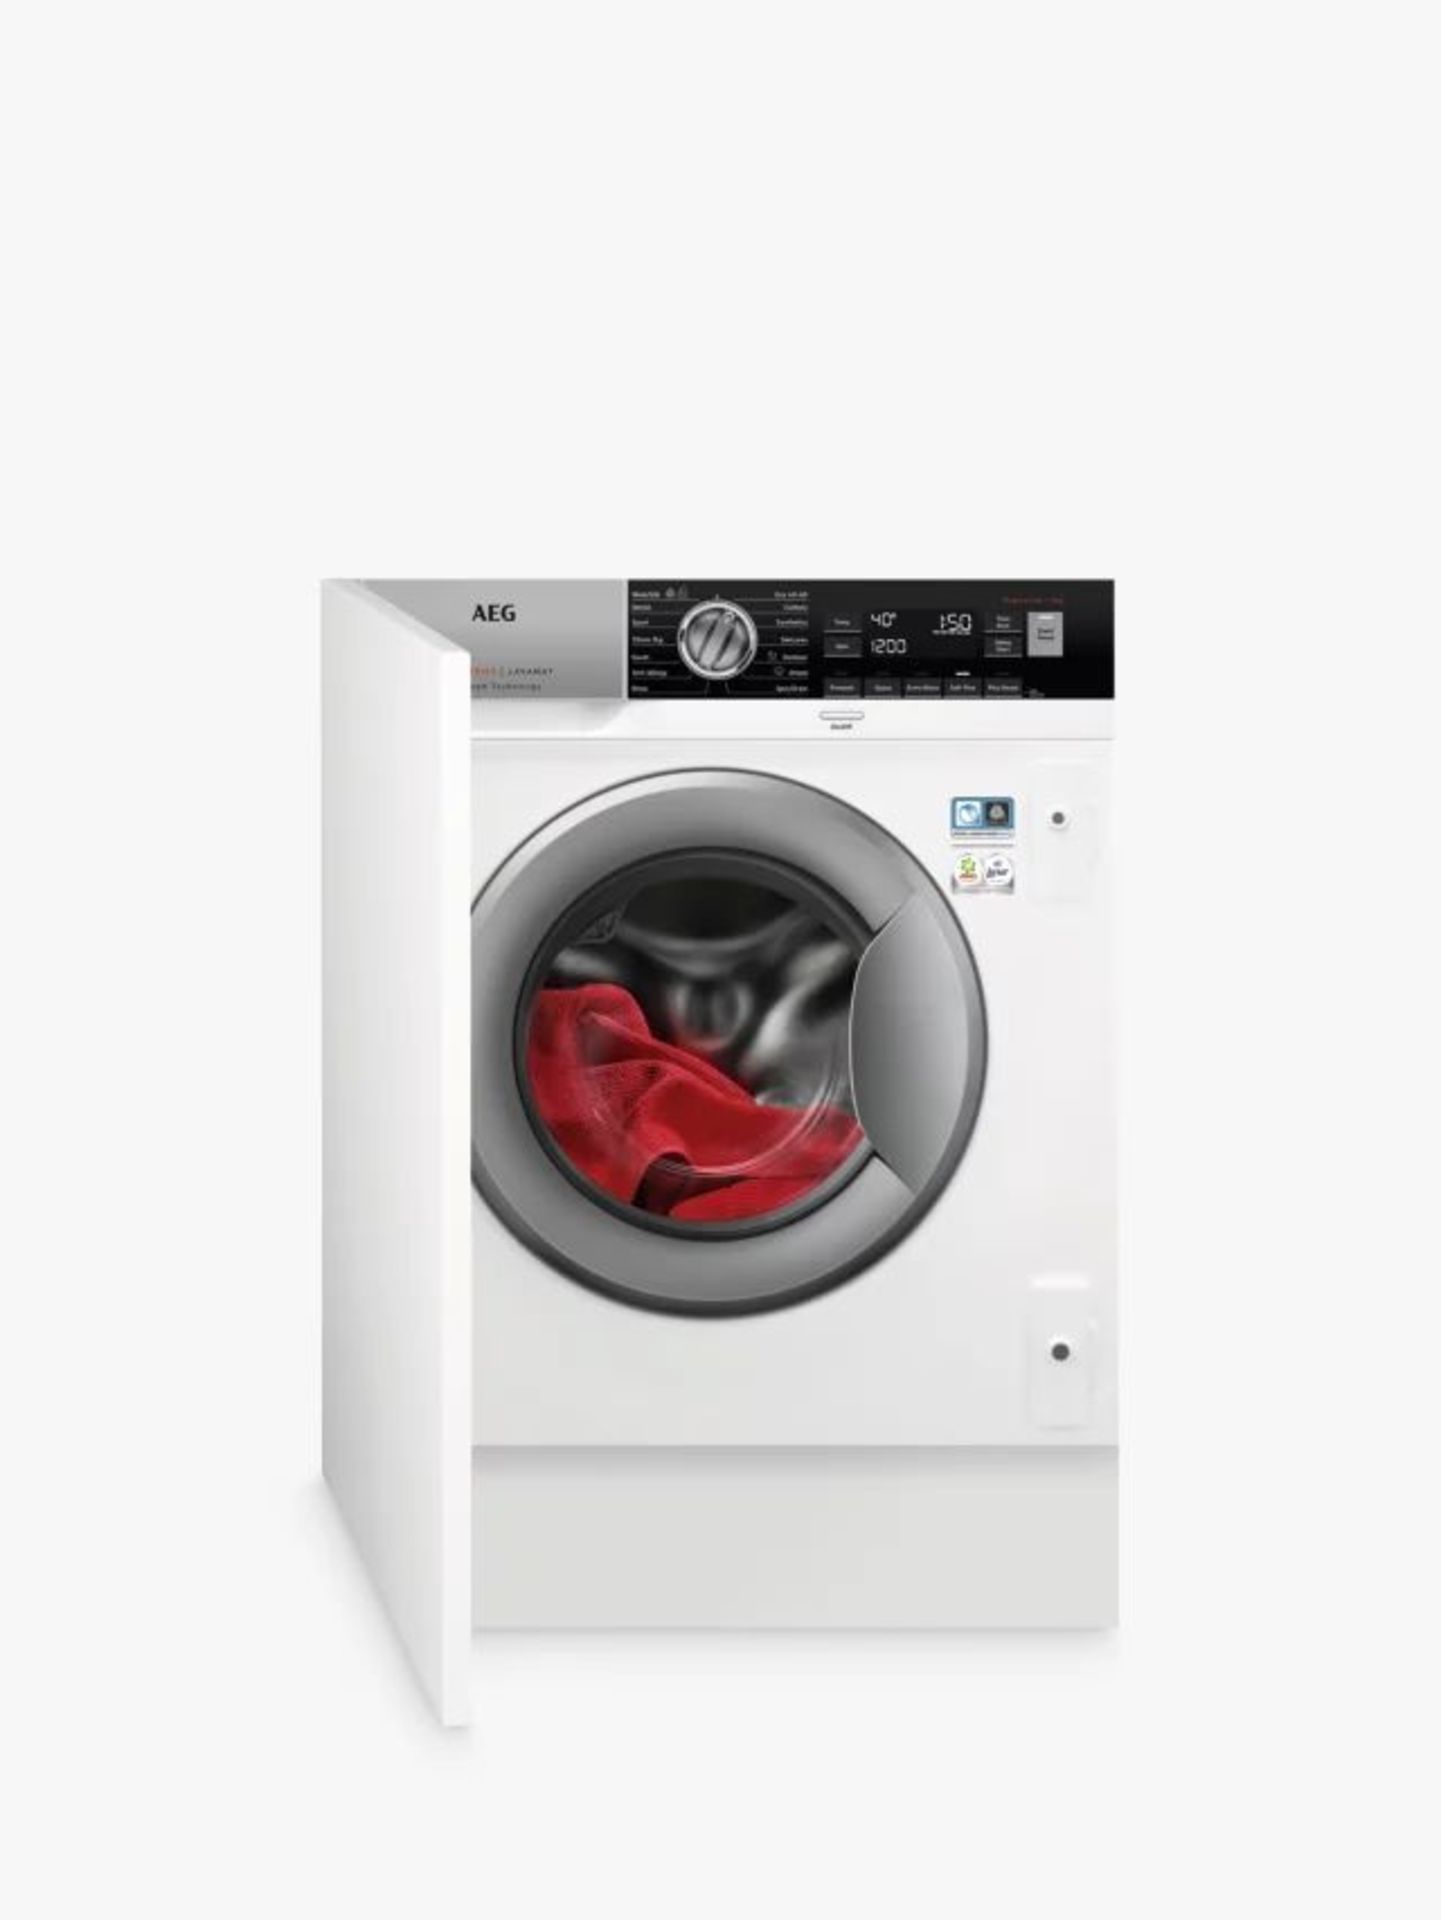 AEG 7000 L7FC8432BI Integrated Washing Machine, 8kg Load, 1400rpm Spin, White. - H/S. RRP £999.00. - Image 4 of 6